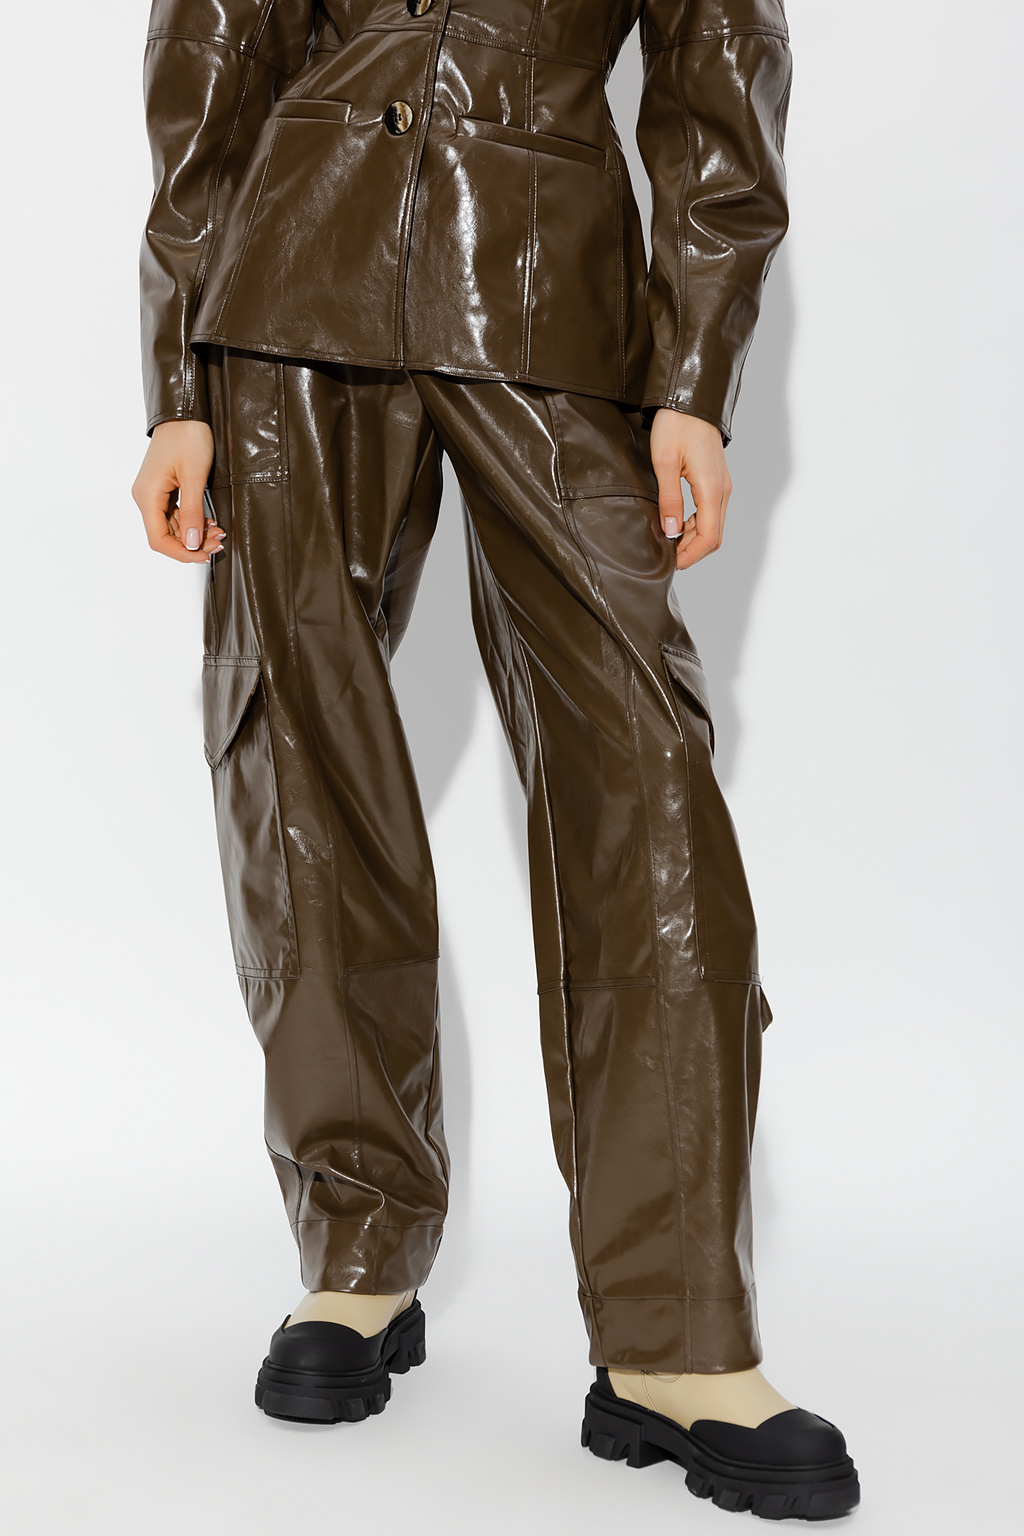 Ganni Faux leather trousers